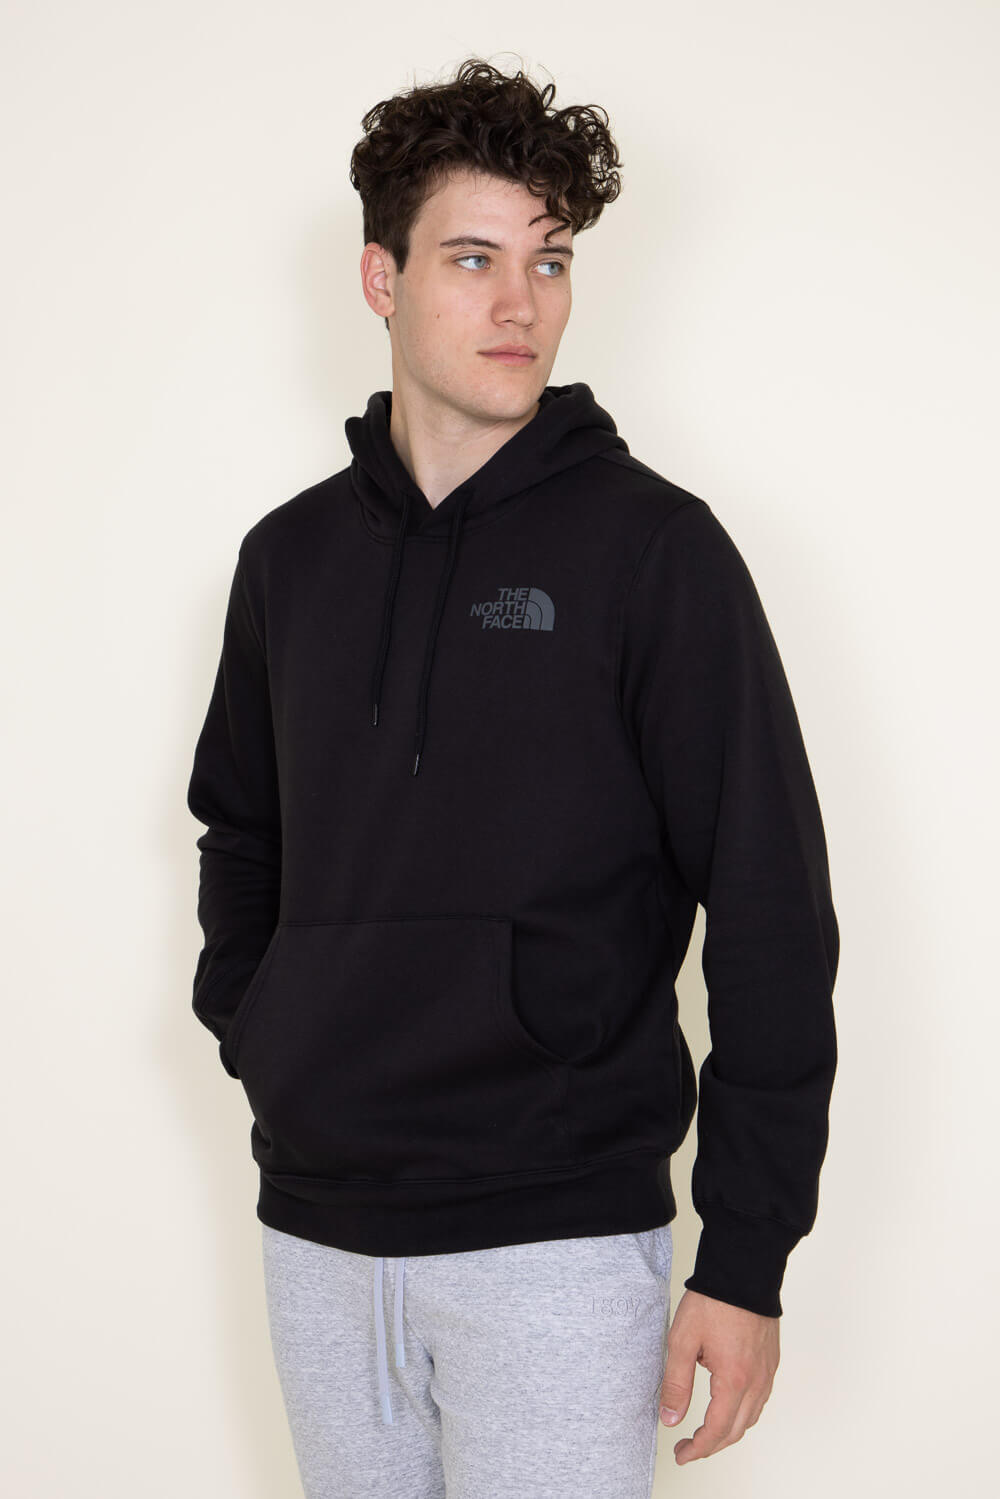 The North Face Bear Brown Hoodie